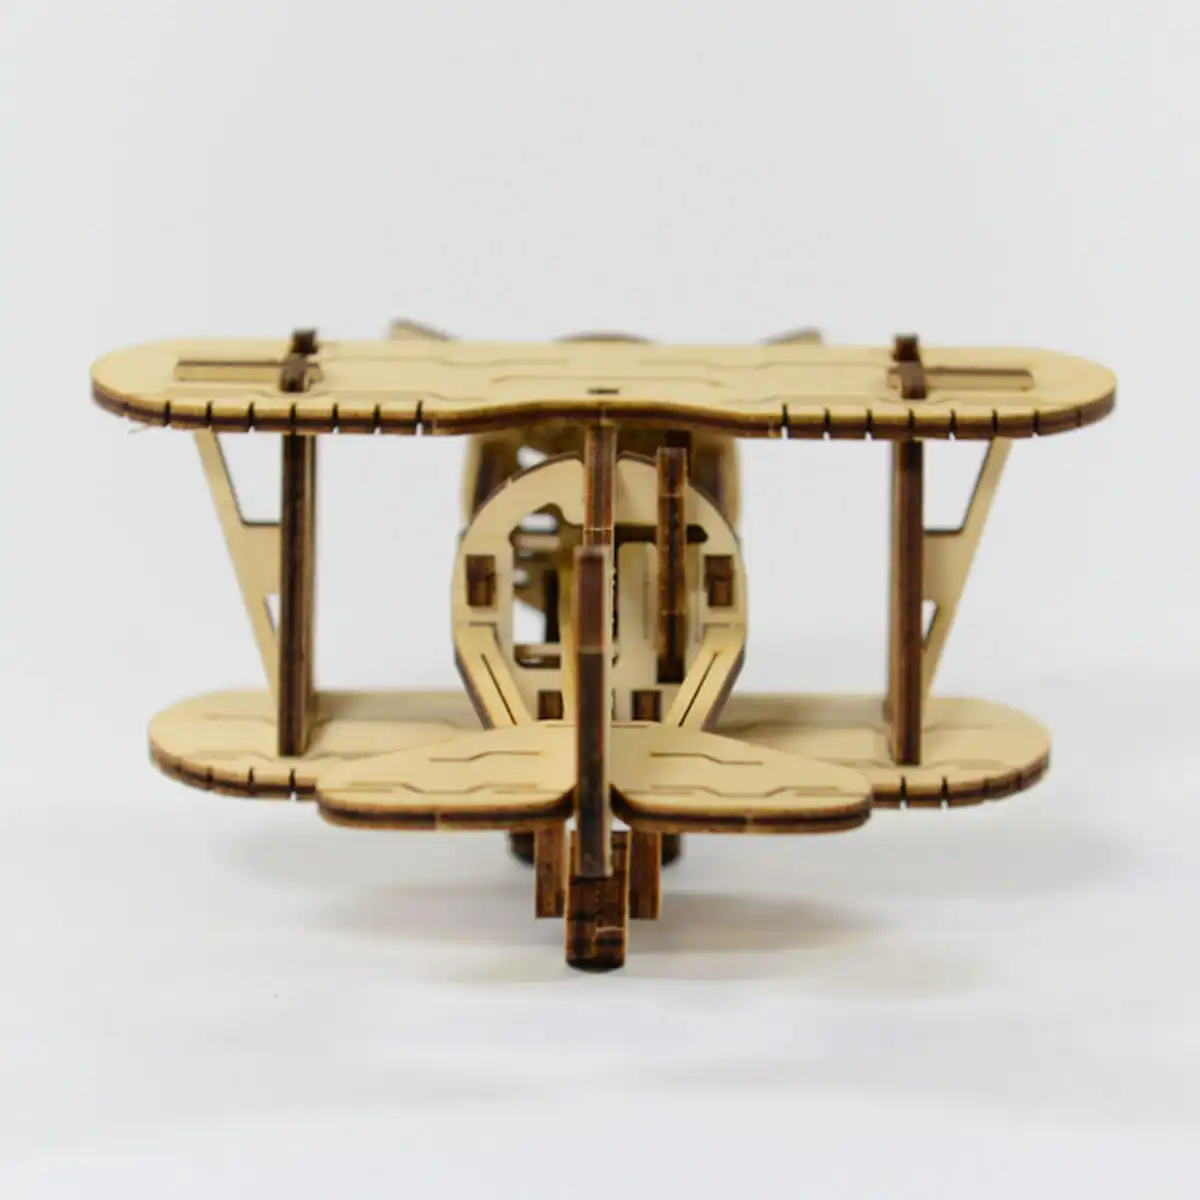 Wooden.City Biplane Wooden 3D Puzzles for Adults - Aircraft Wood Model for Painting - 3D Wooden Puzzles Plane - 63 Parts Wooden Models for Adults to B